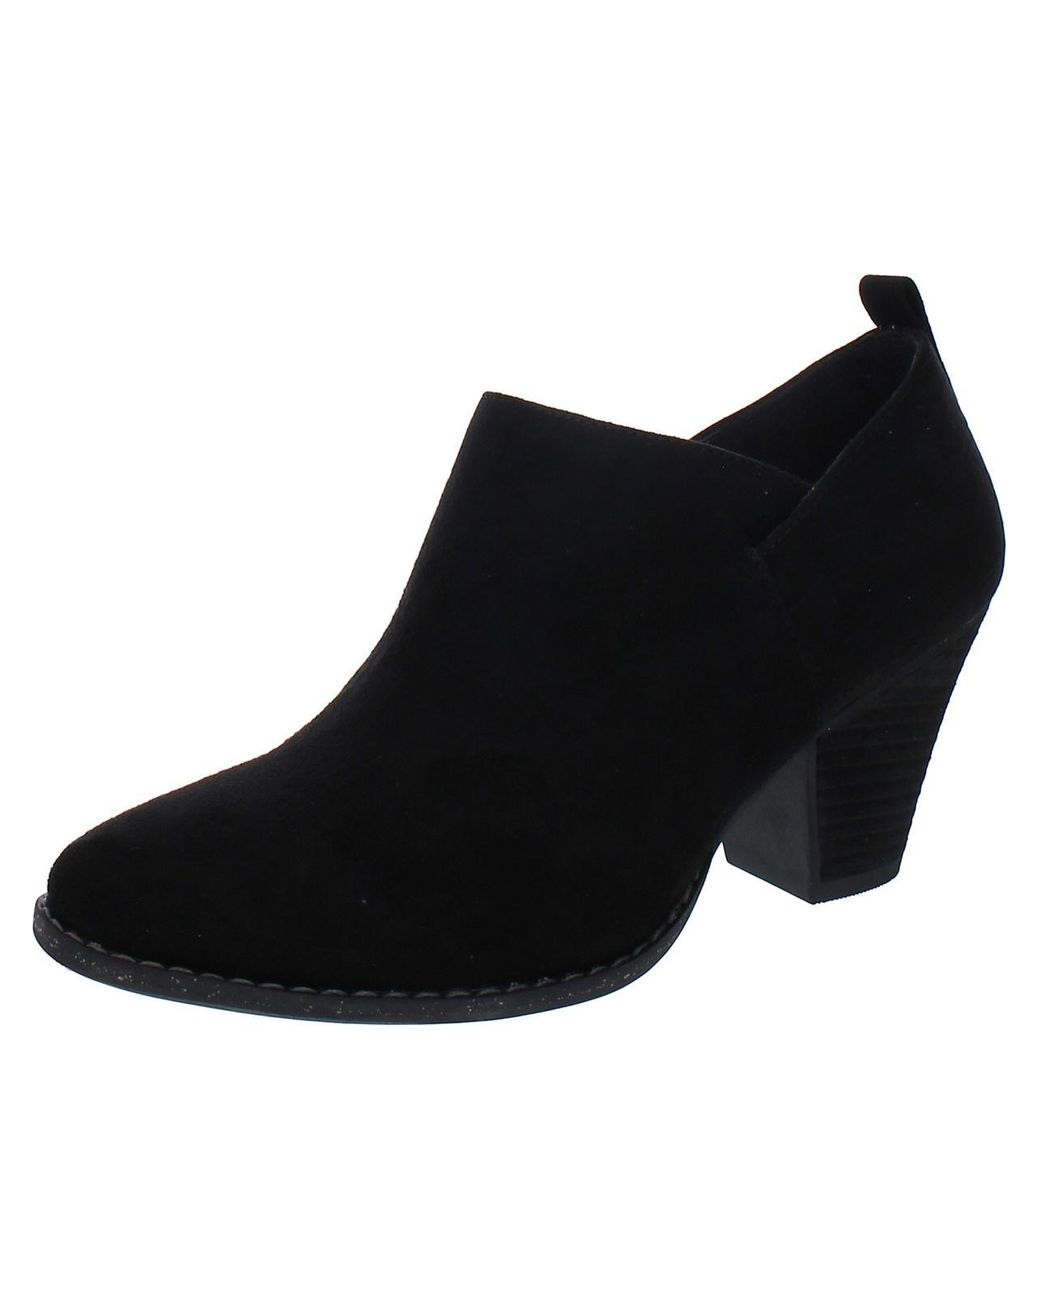 Dr. Scholls Cuba Faux Suede Round Toe Ankle Boots in Black | Lyst